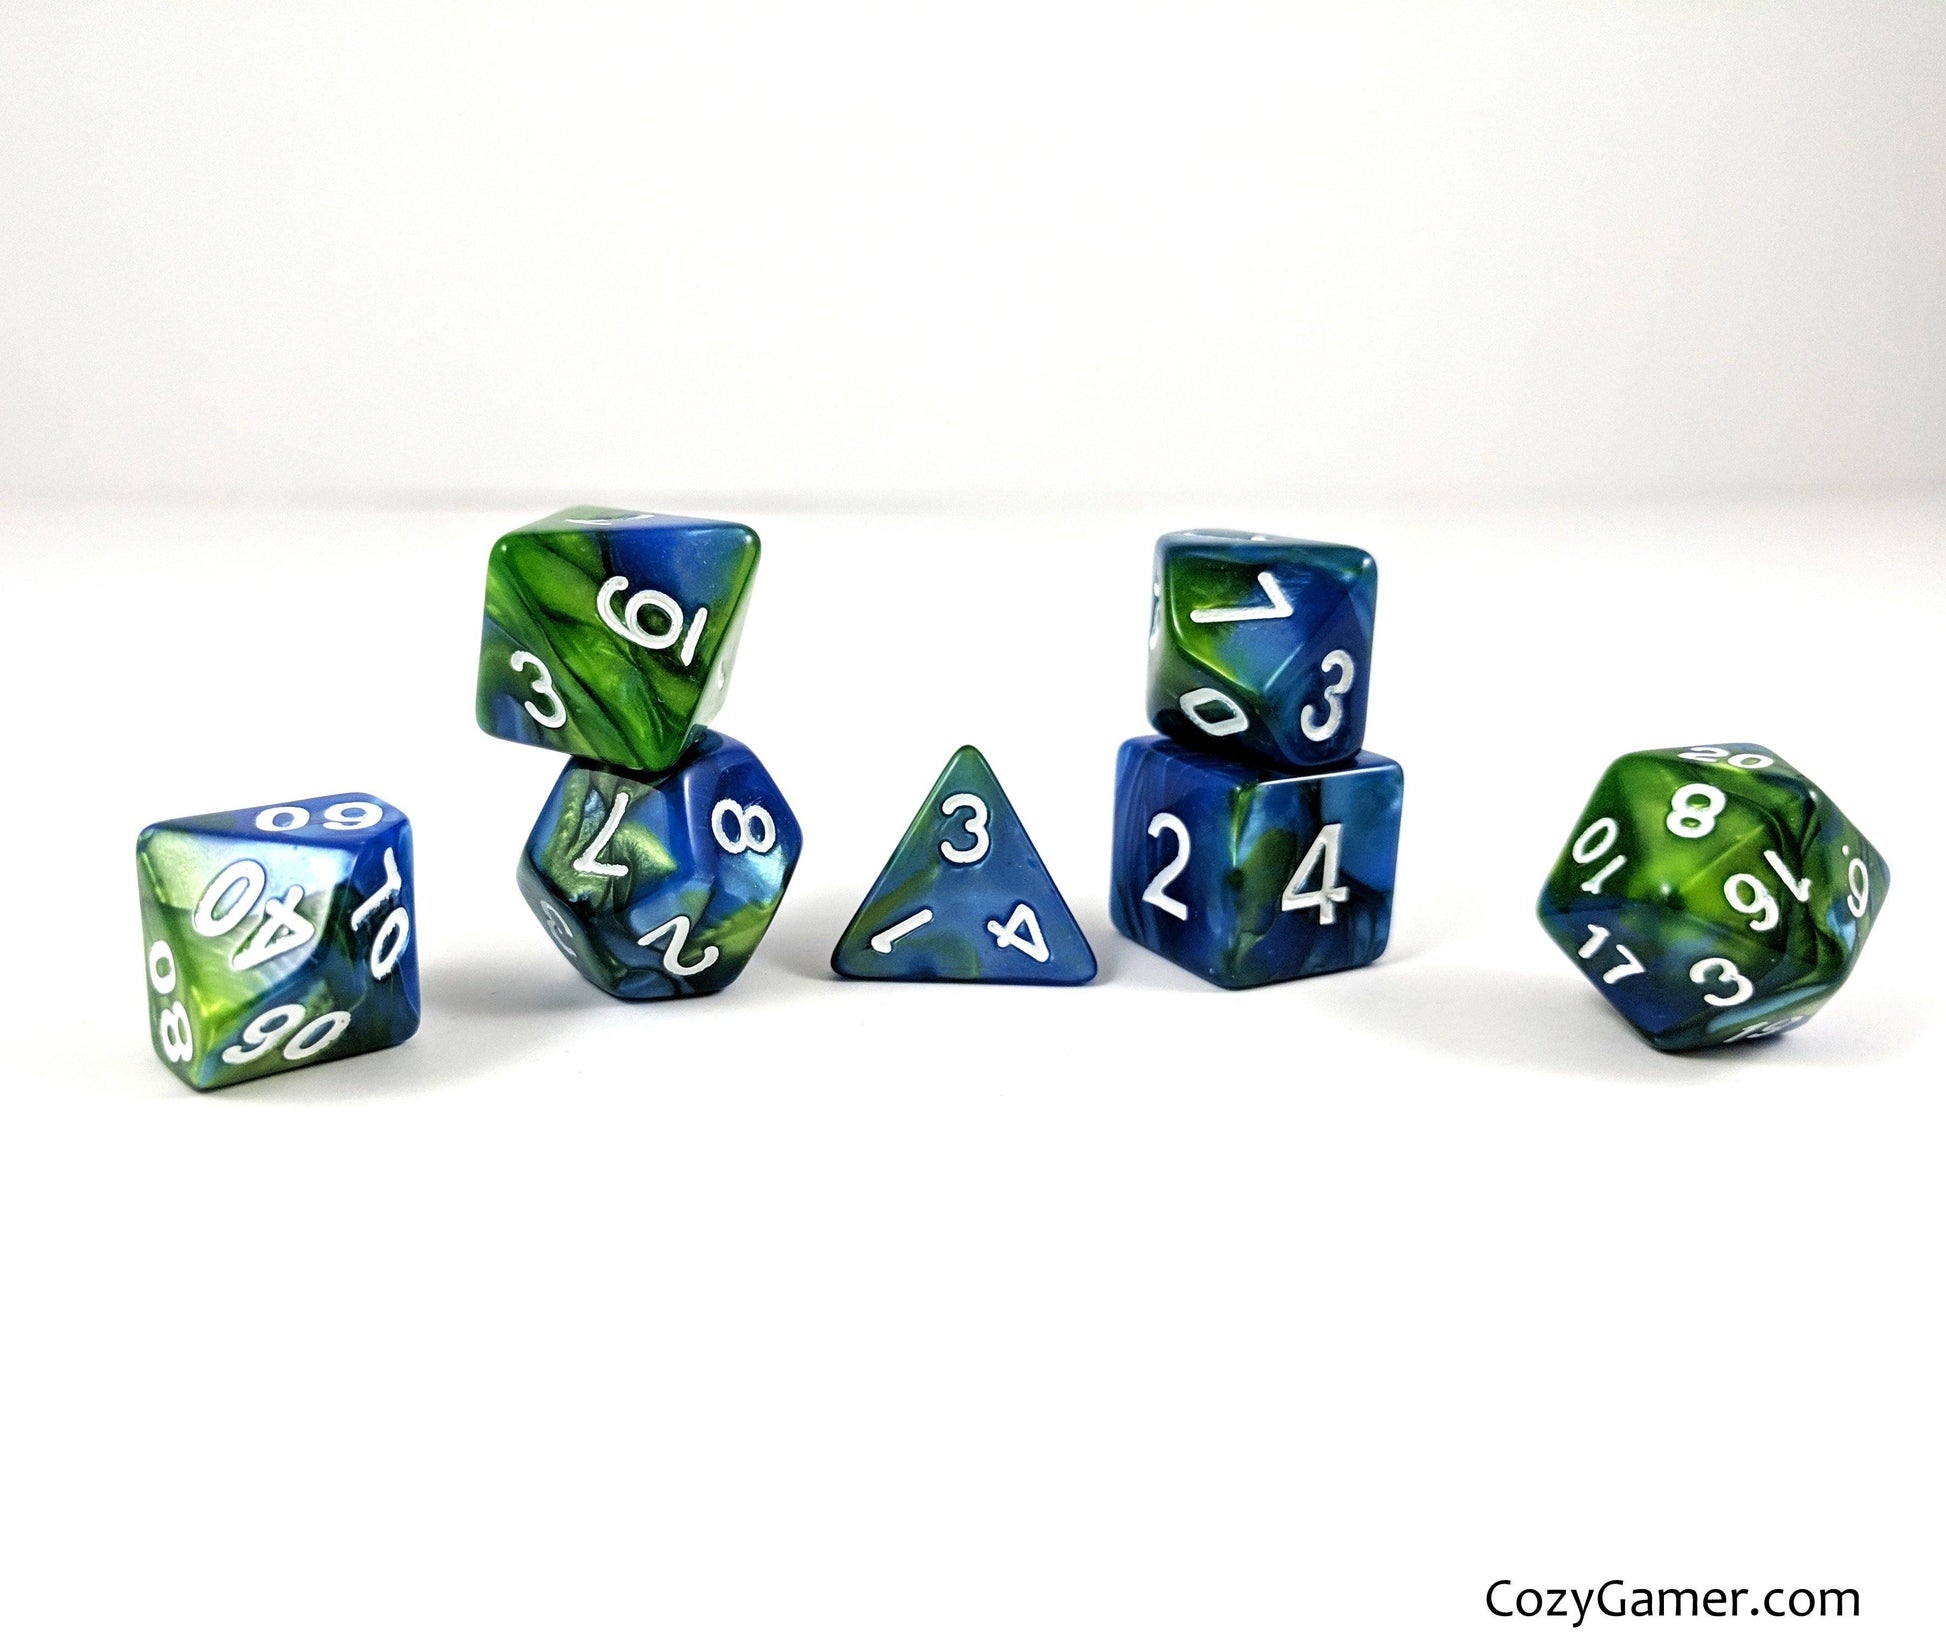 Blue Planet Dice Set, Pearly Blue and Green Dice - CozyGamer